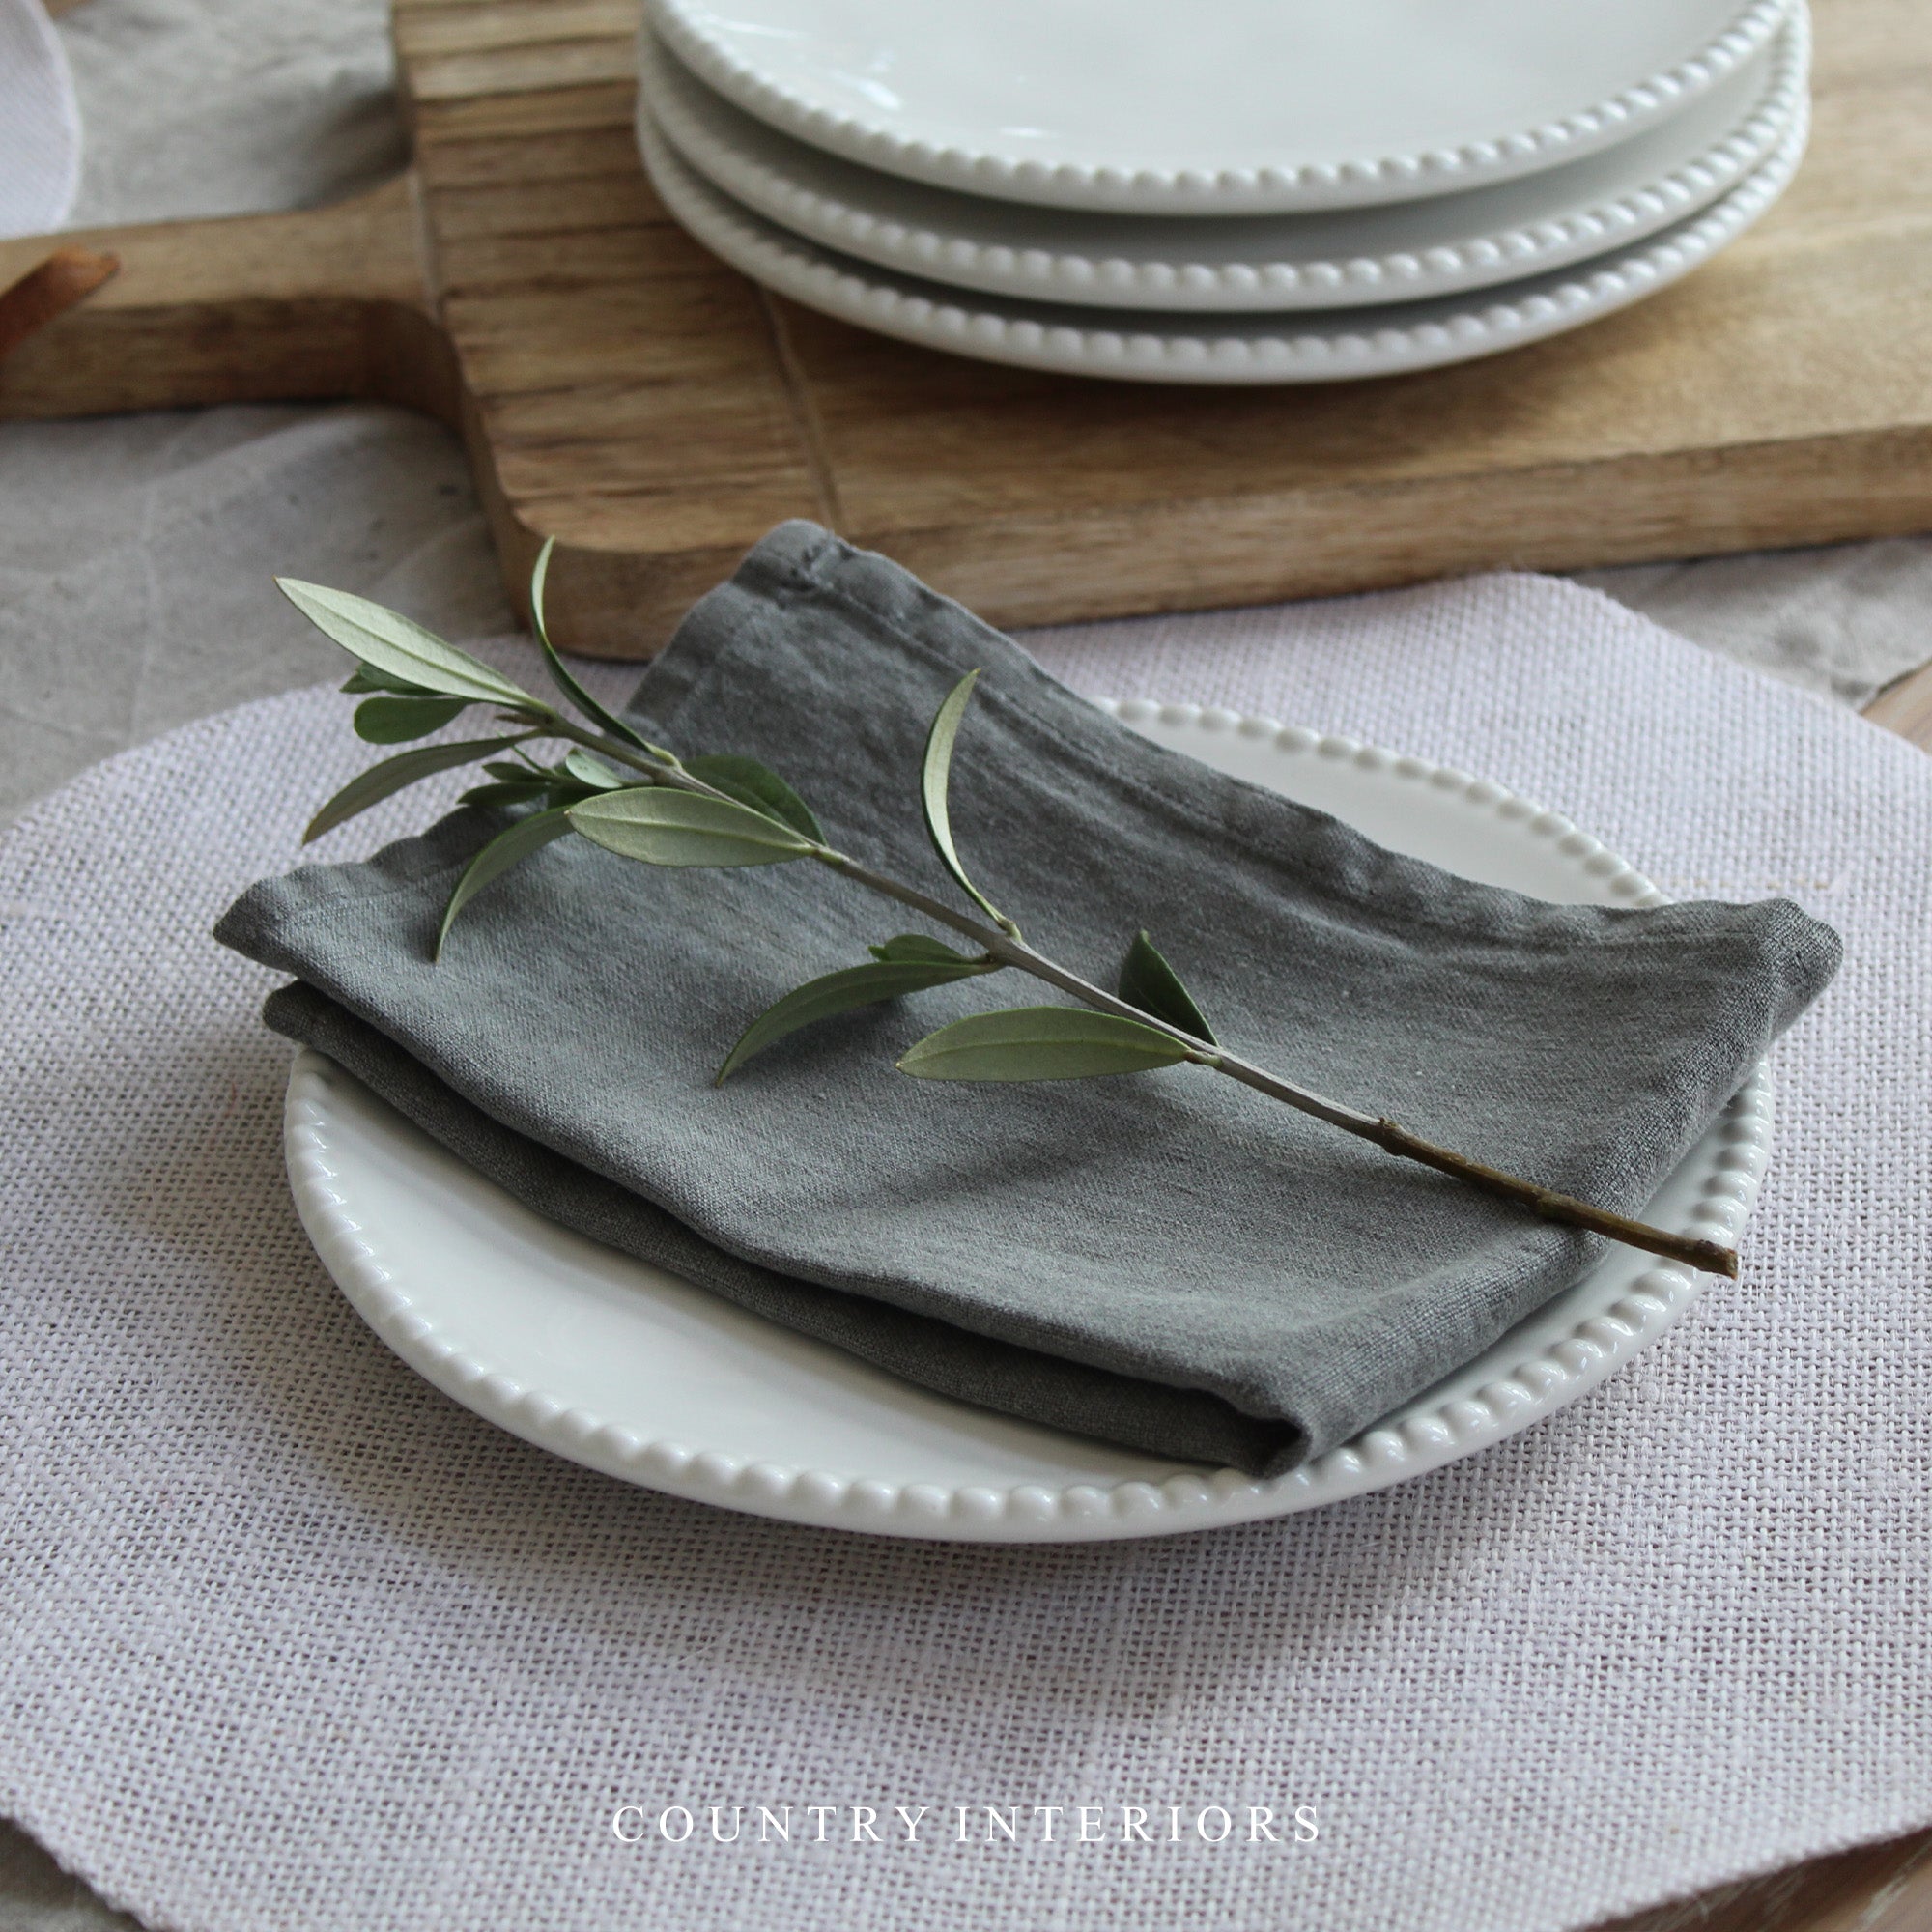 Stonewashed Linen Napkin in Charcoal - Set of Four